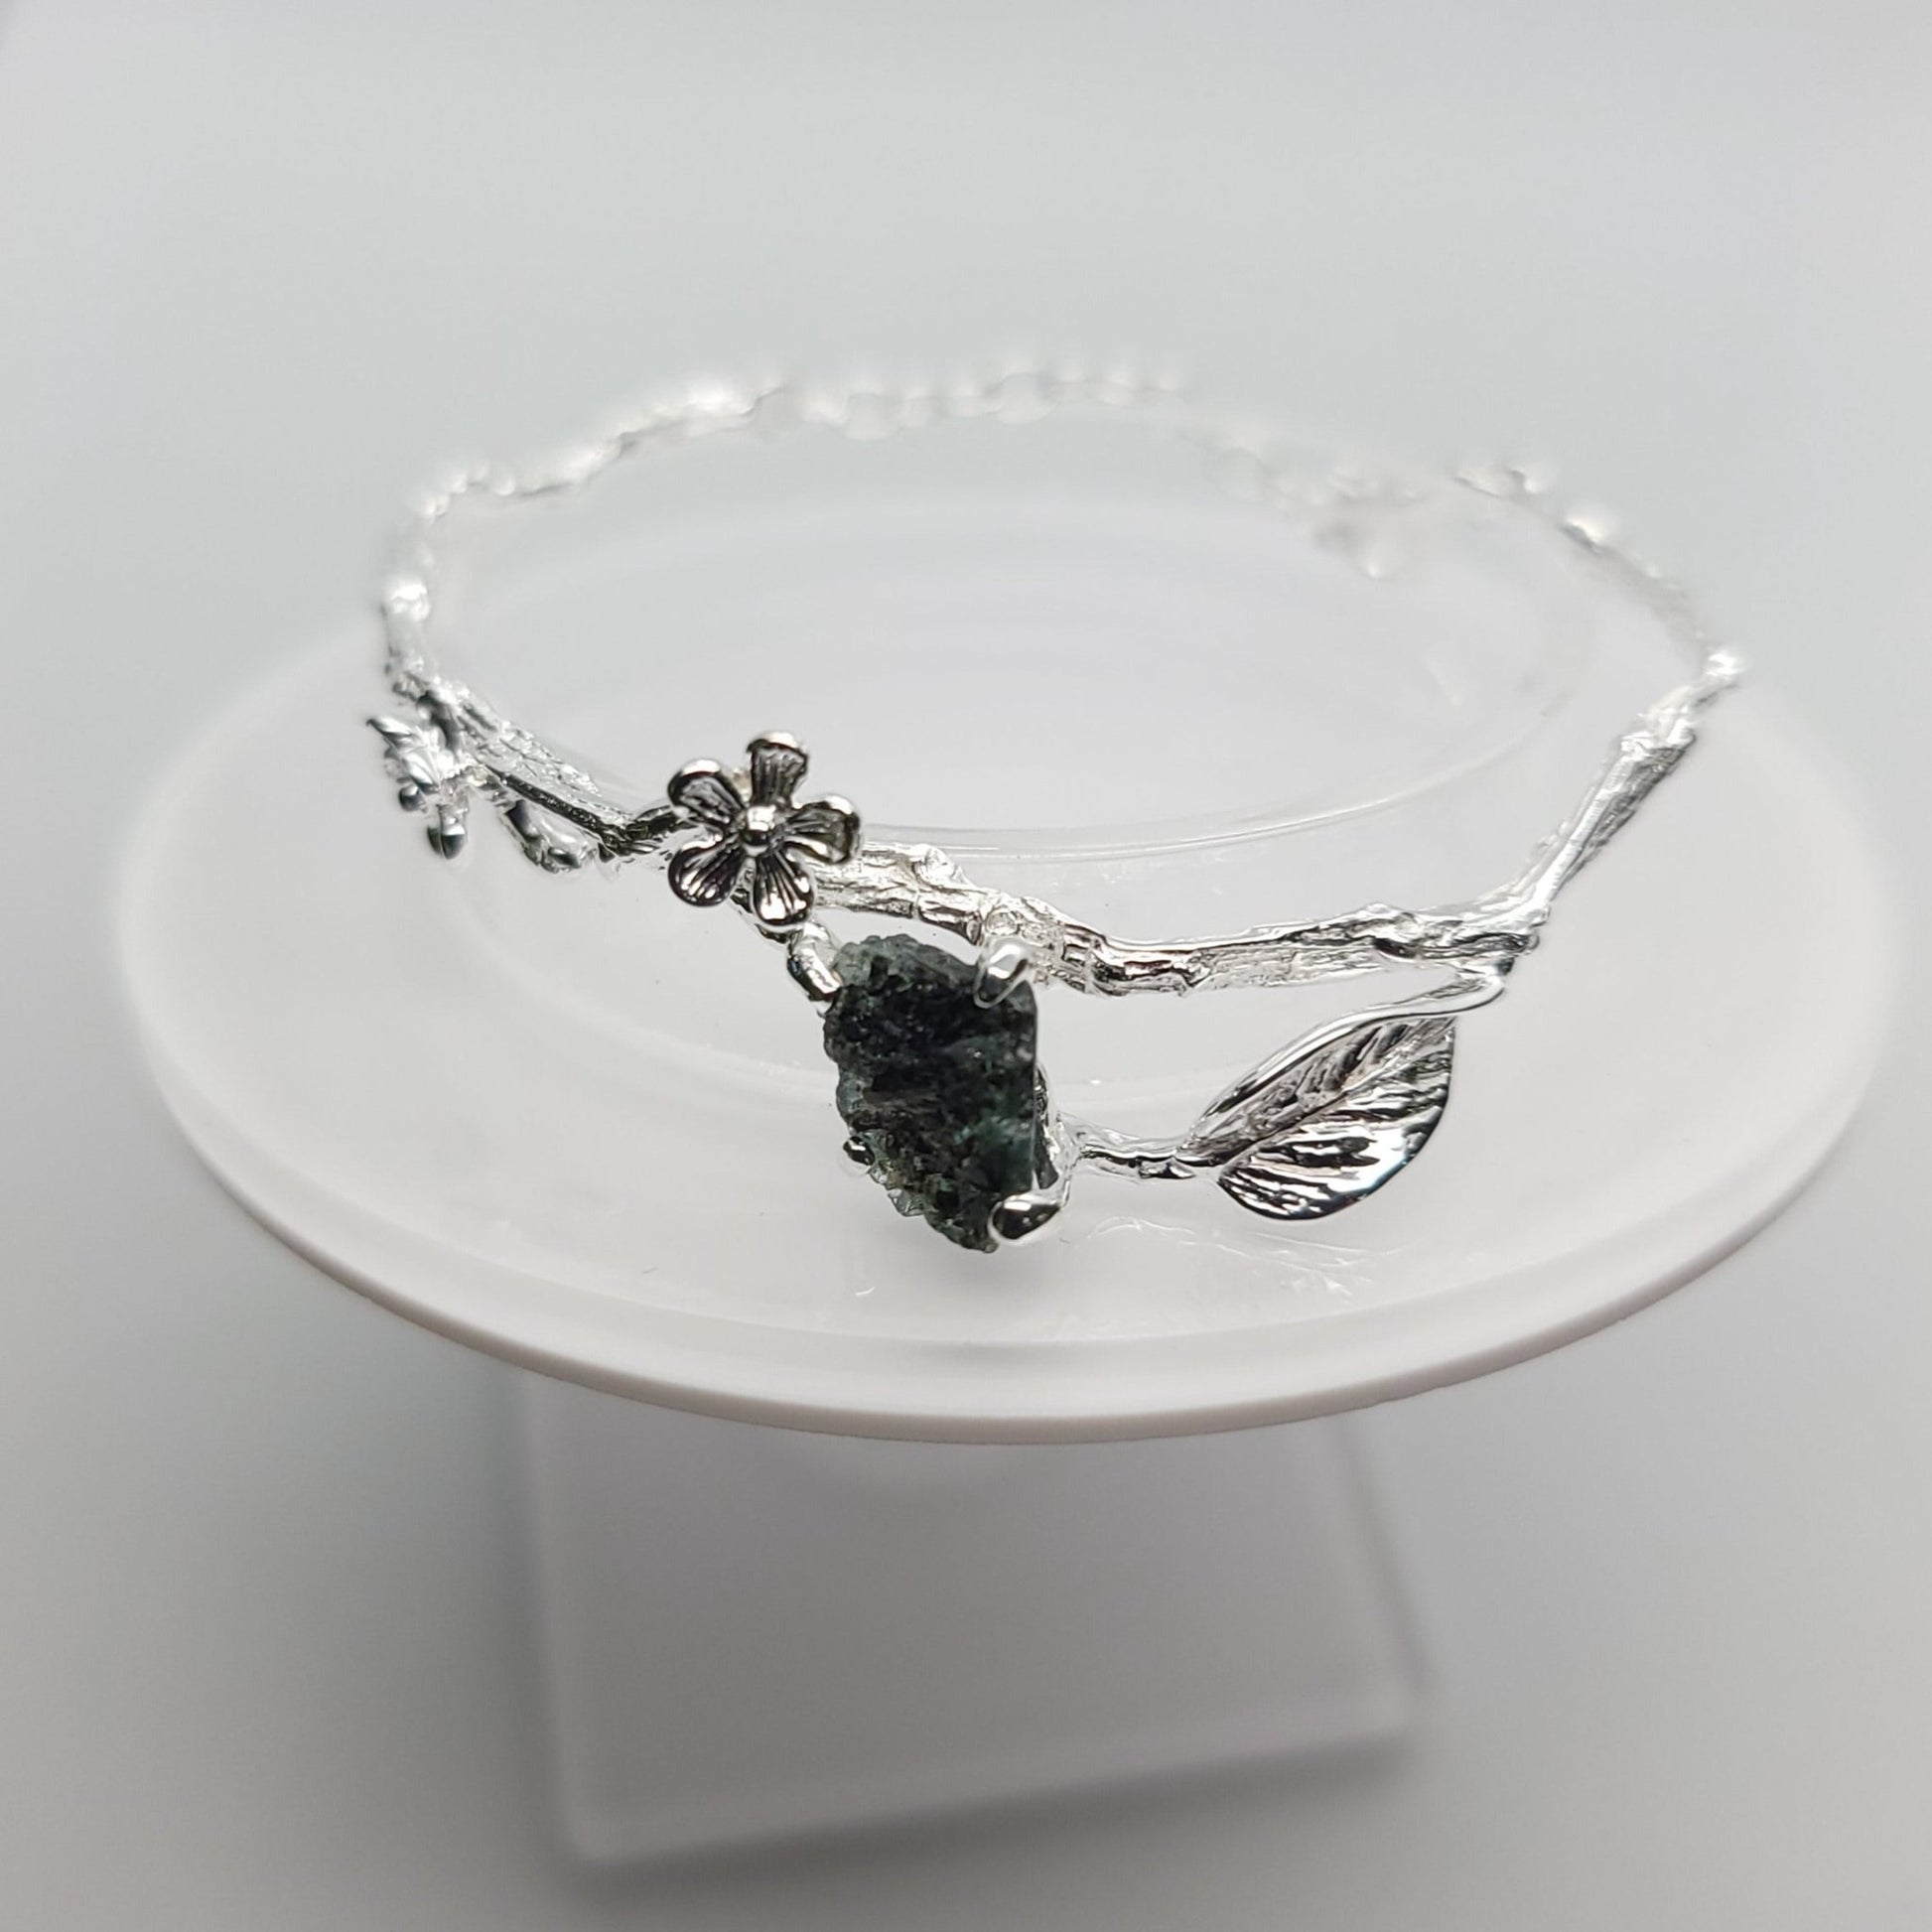 silver branch bracelet adorneds with flowers leaves and a raw emerald centerpiece